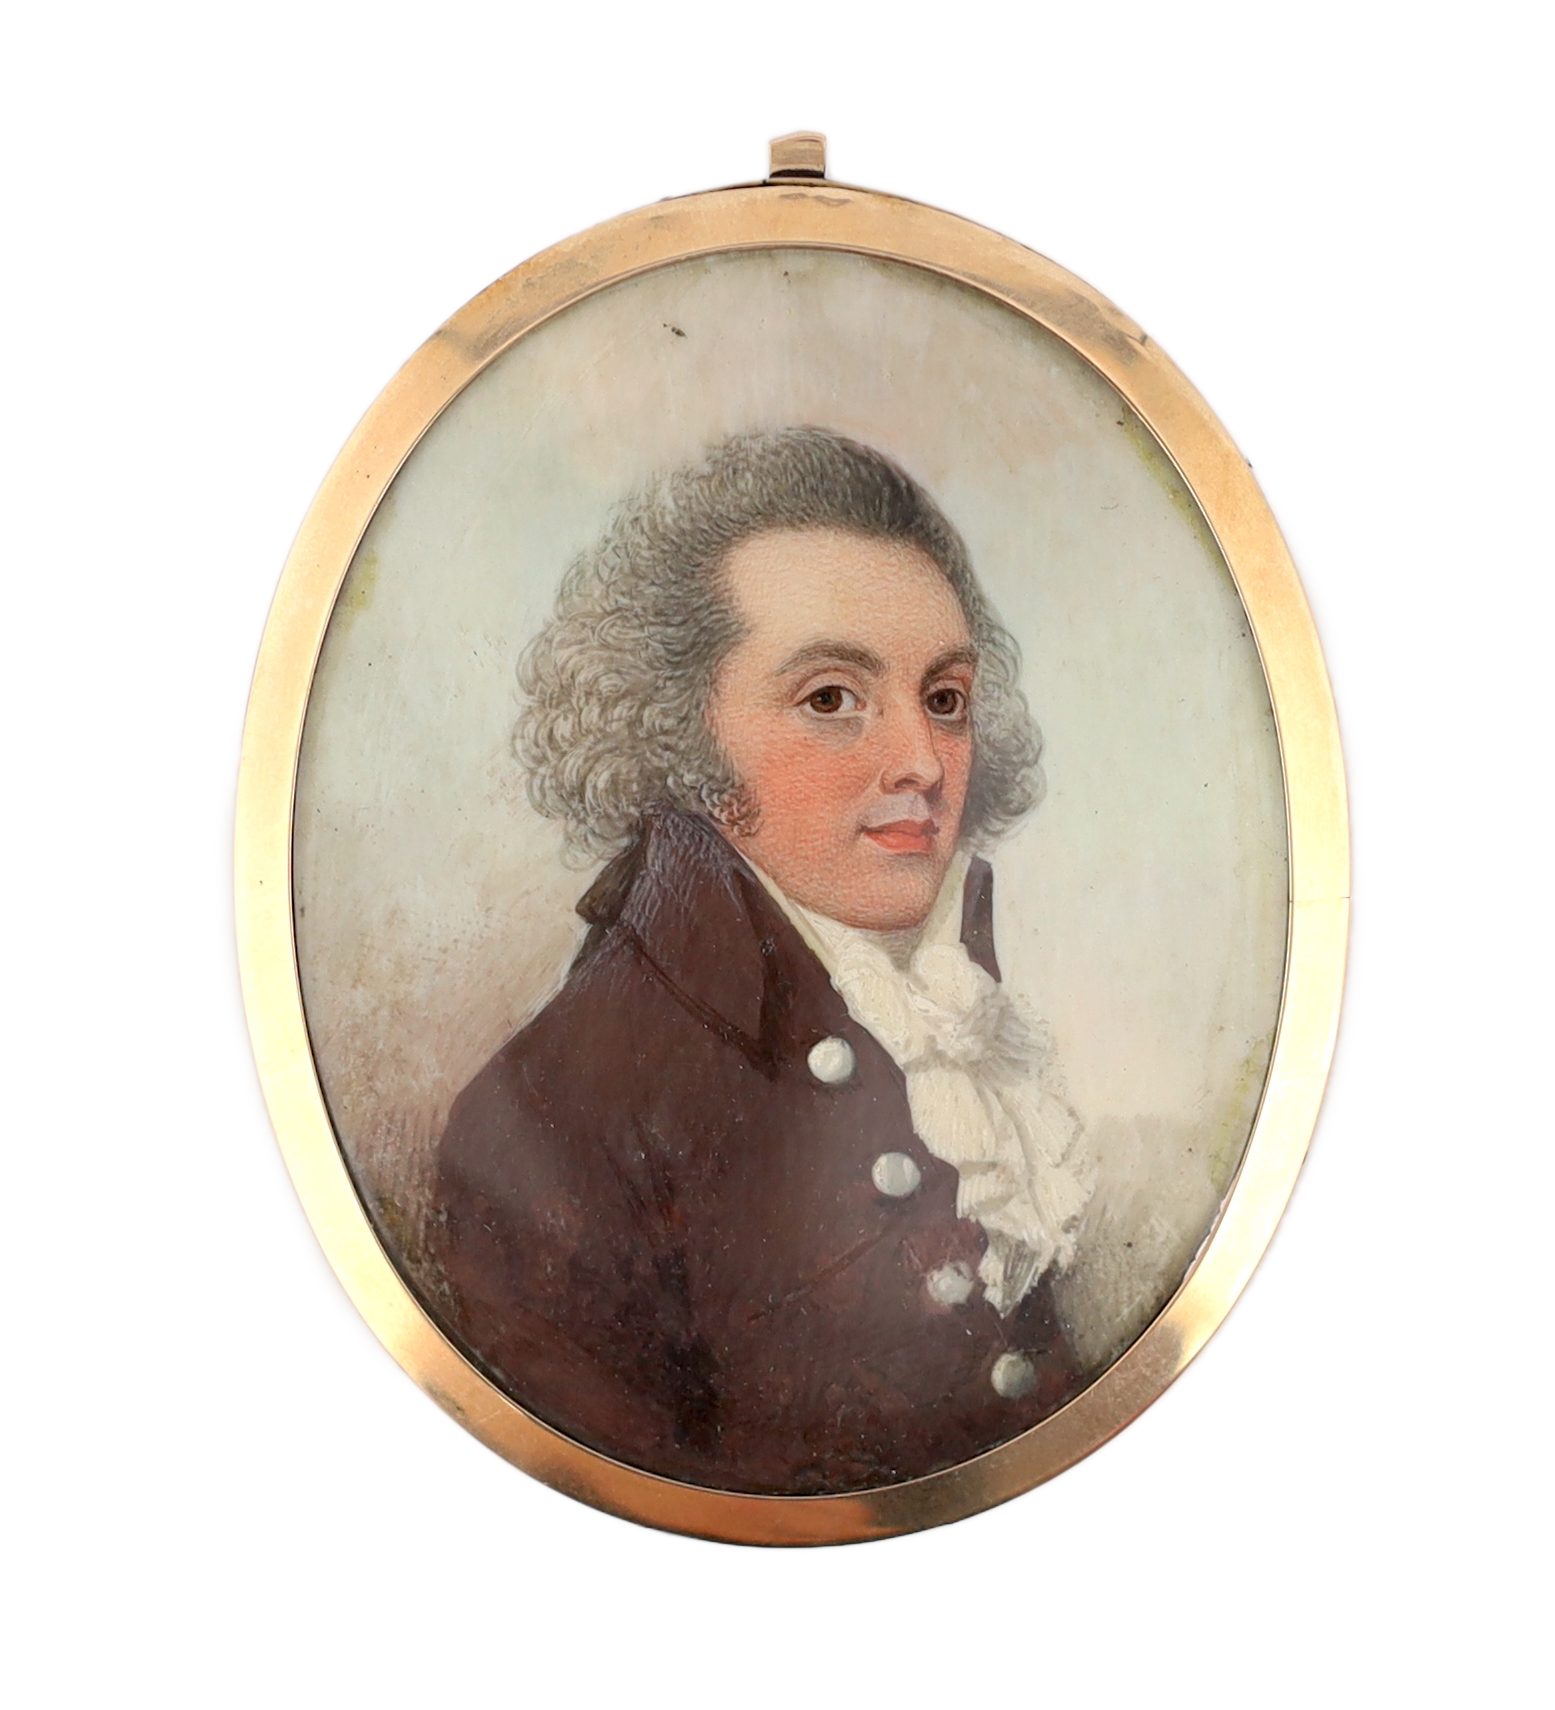 Frederick Buck (Irish, 1771-1840), Portrait miniature of a gentleman, watercolour on ivory, 6.4 x 5cm. CITES Submission reference 7VJSAPLN